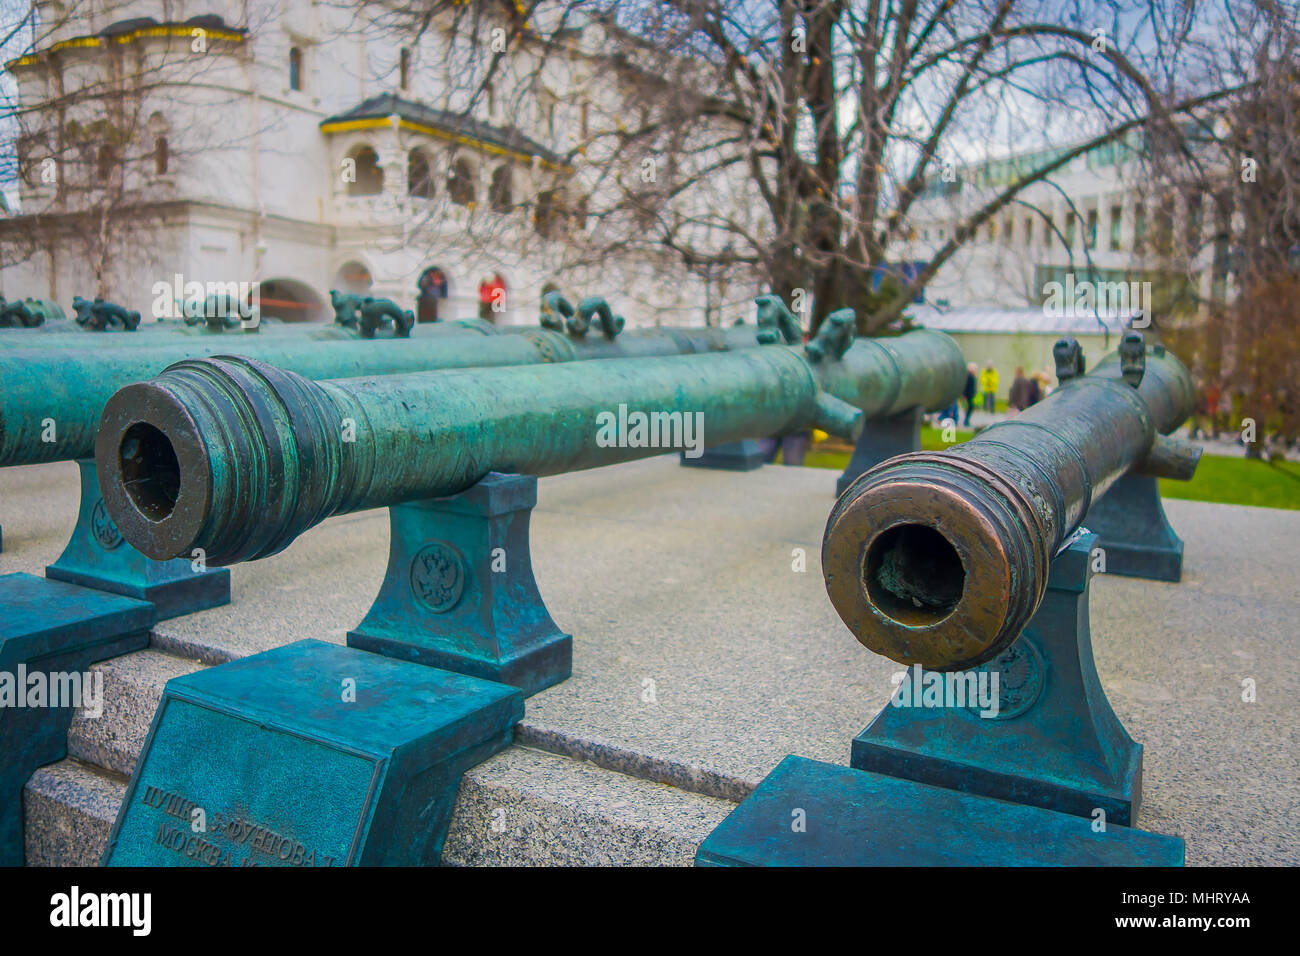 MOSCOW, RUSSIA- APRIL, 24, 2018: Exhibits of old military trunks of ancient cannons. Collection incorporates old Russian and foreign cannons of XVI-XIX centuries shown in the Moscow Stock Photo